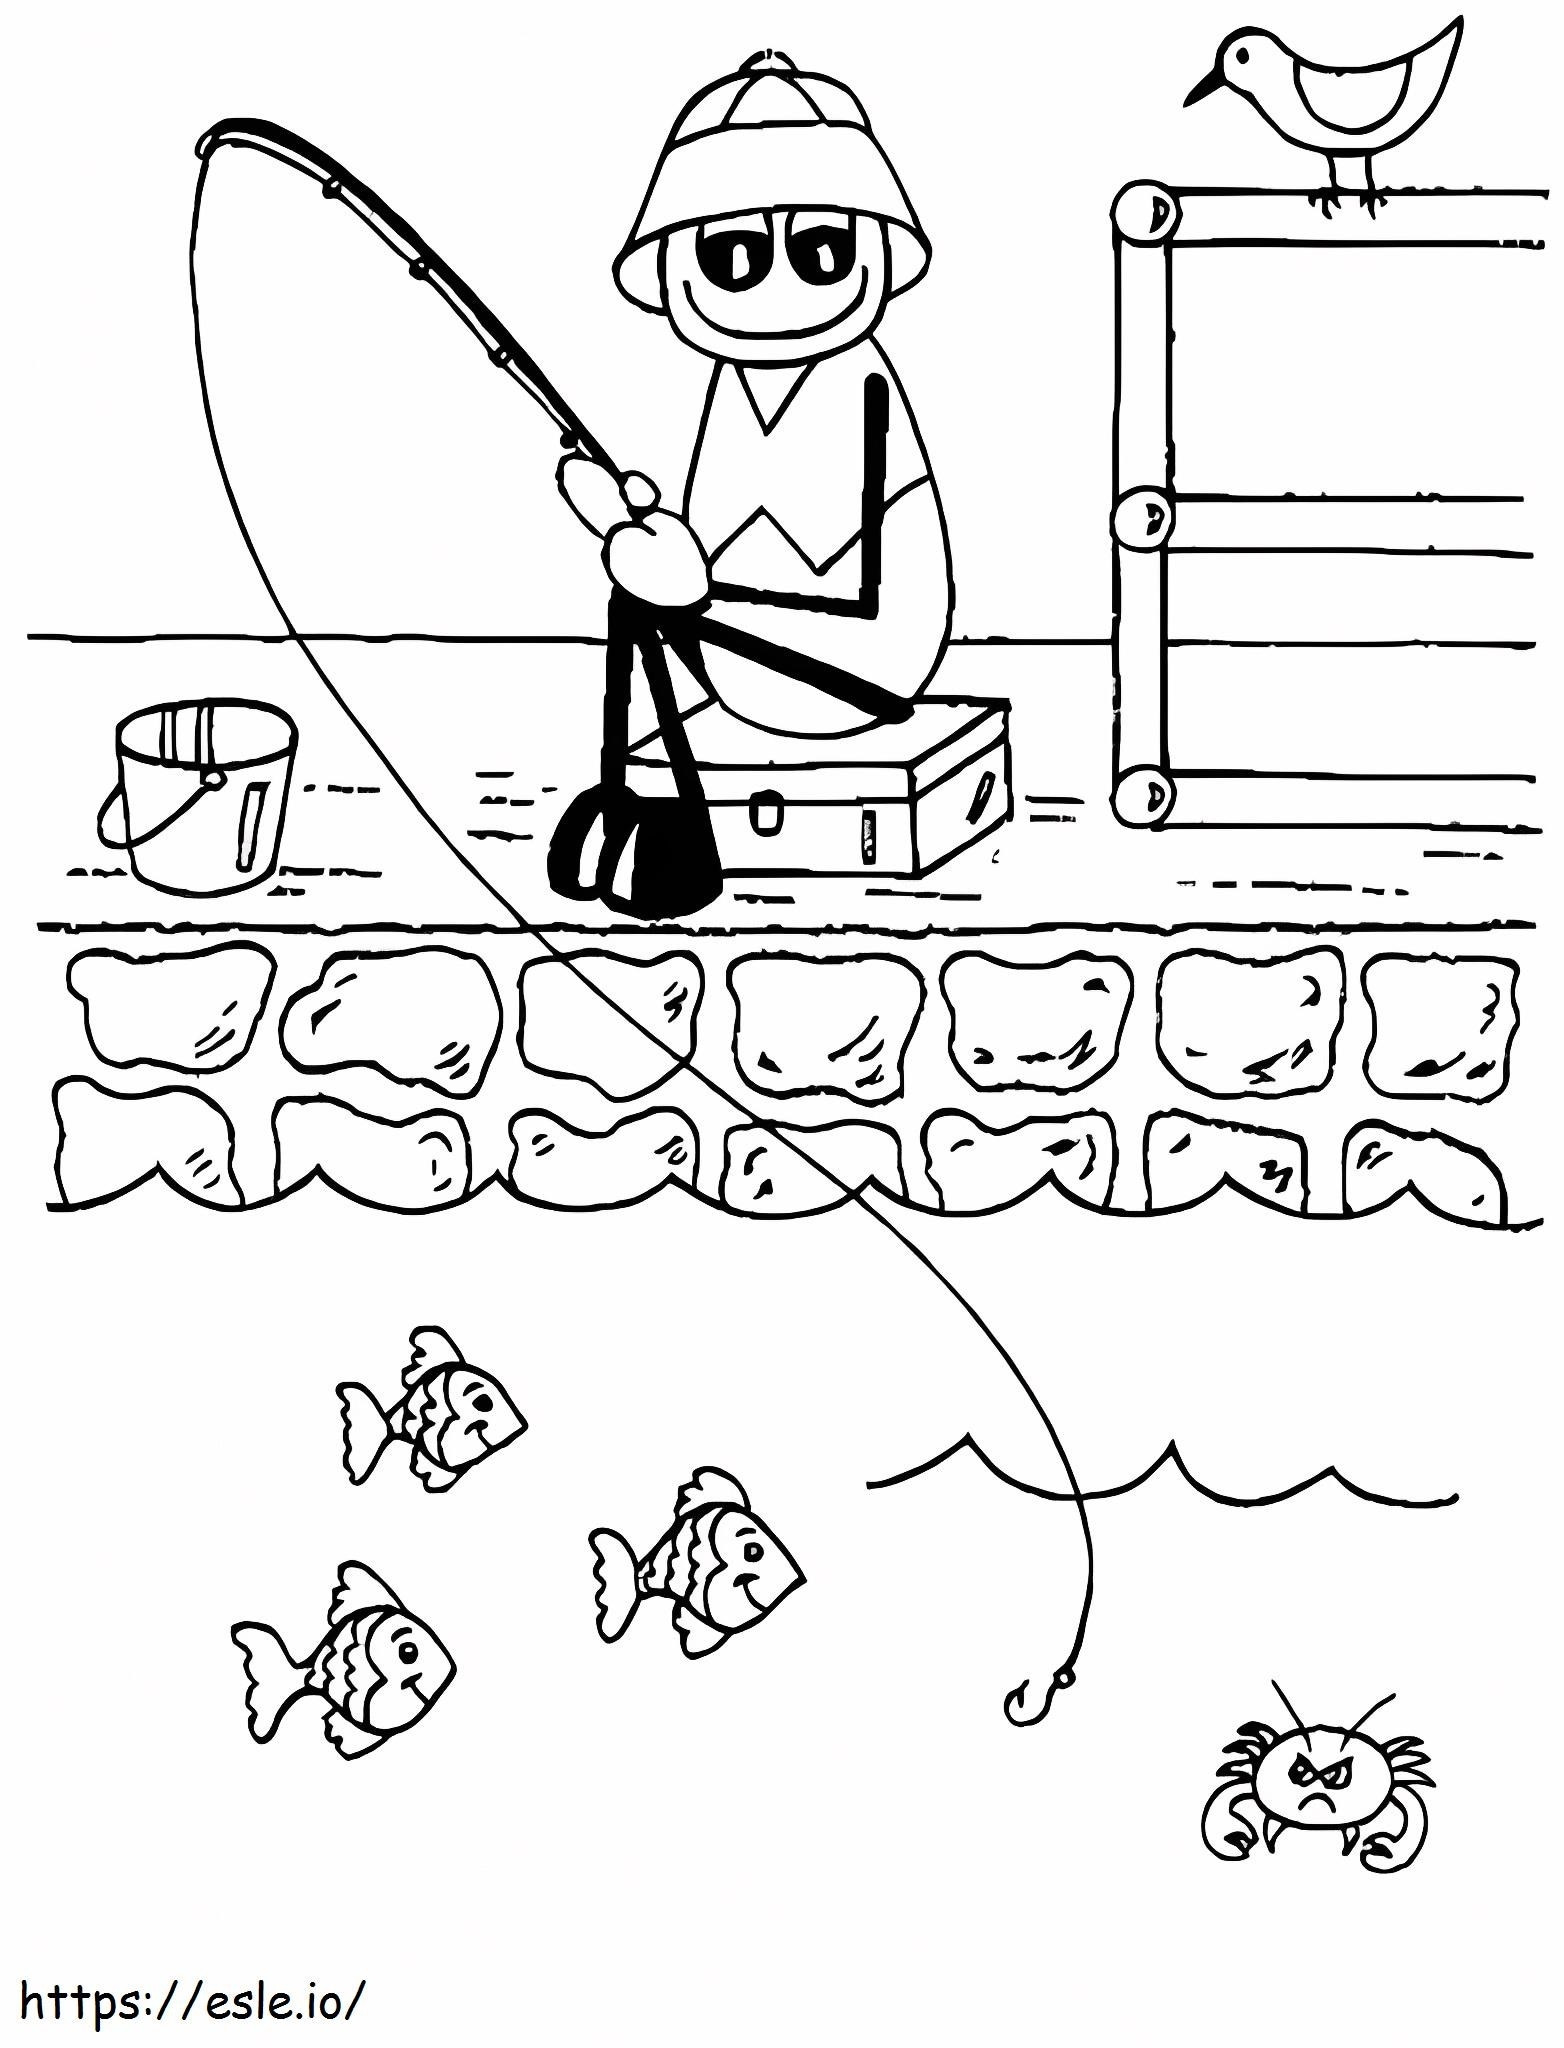 Old Fisherman coloring page